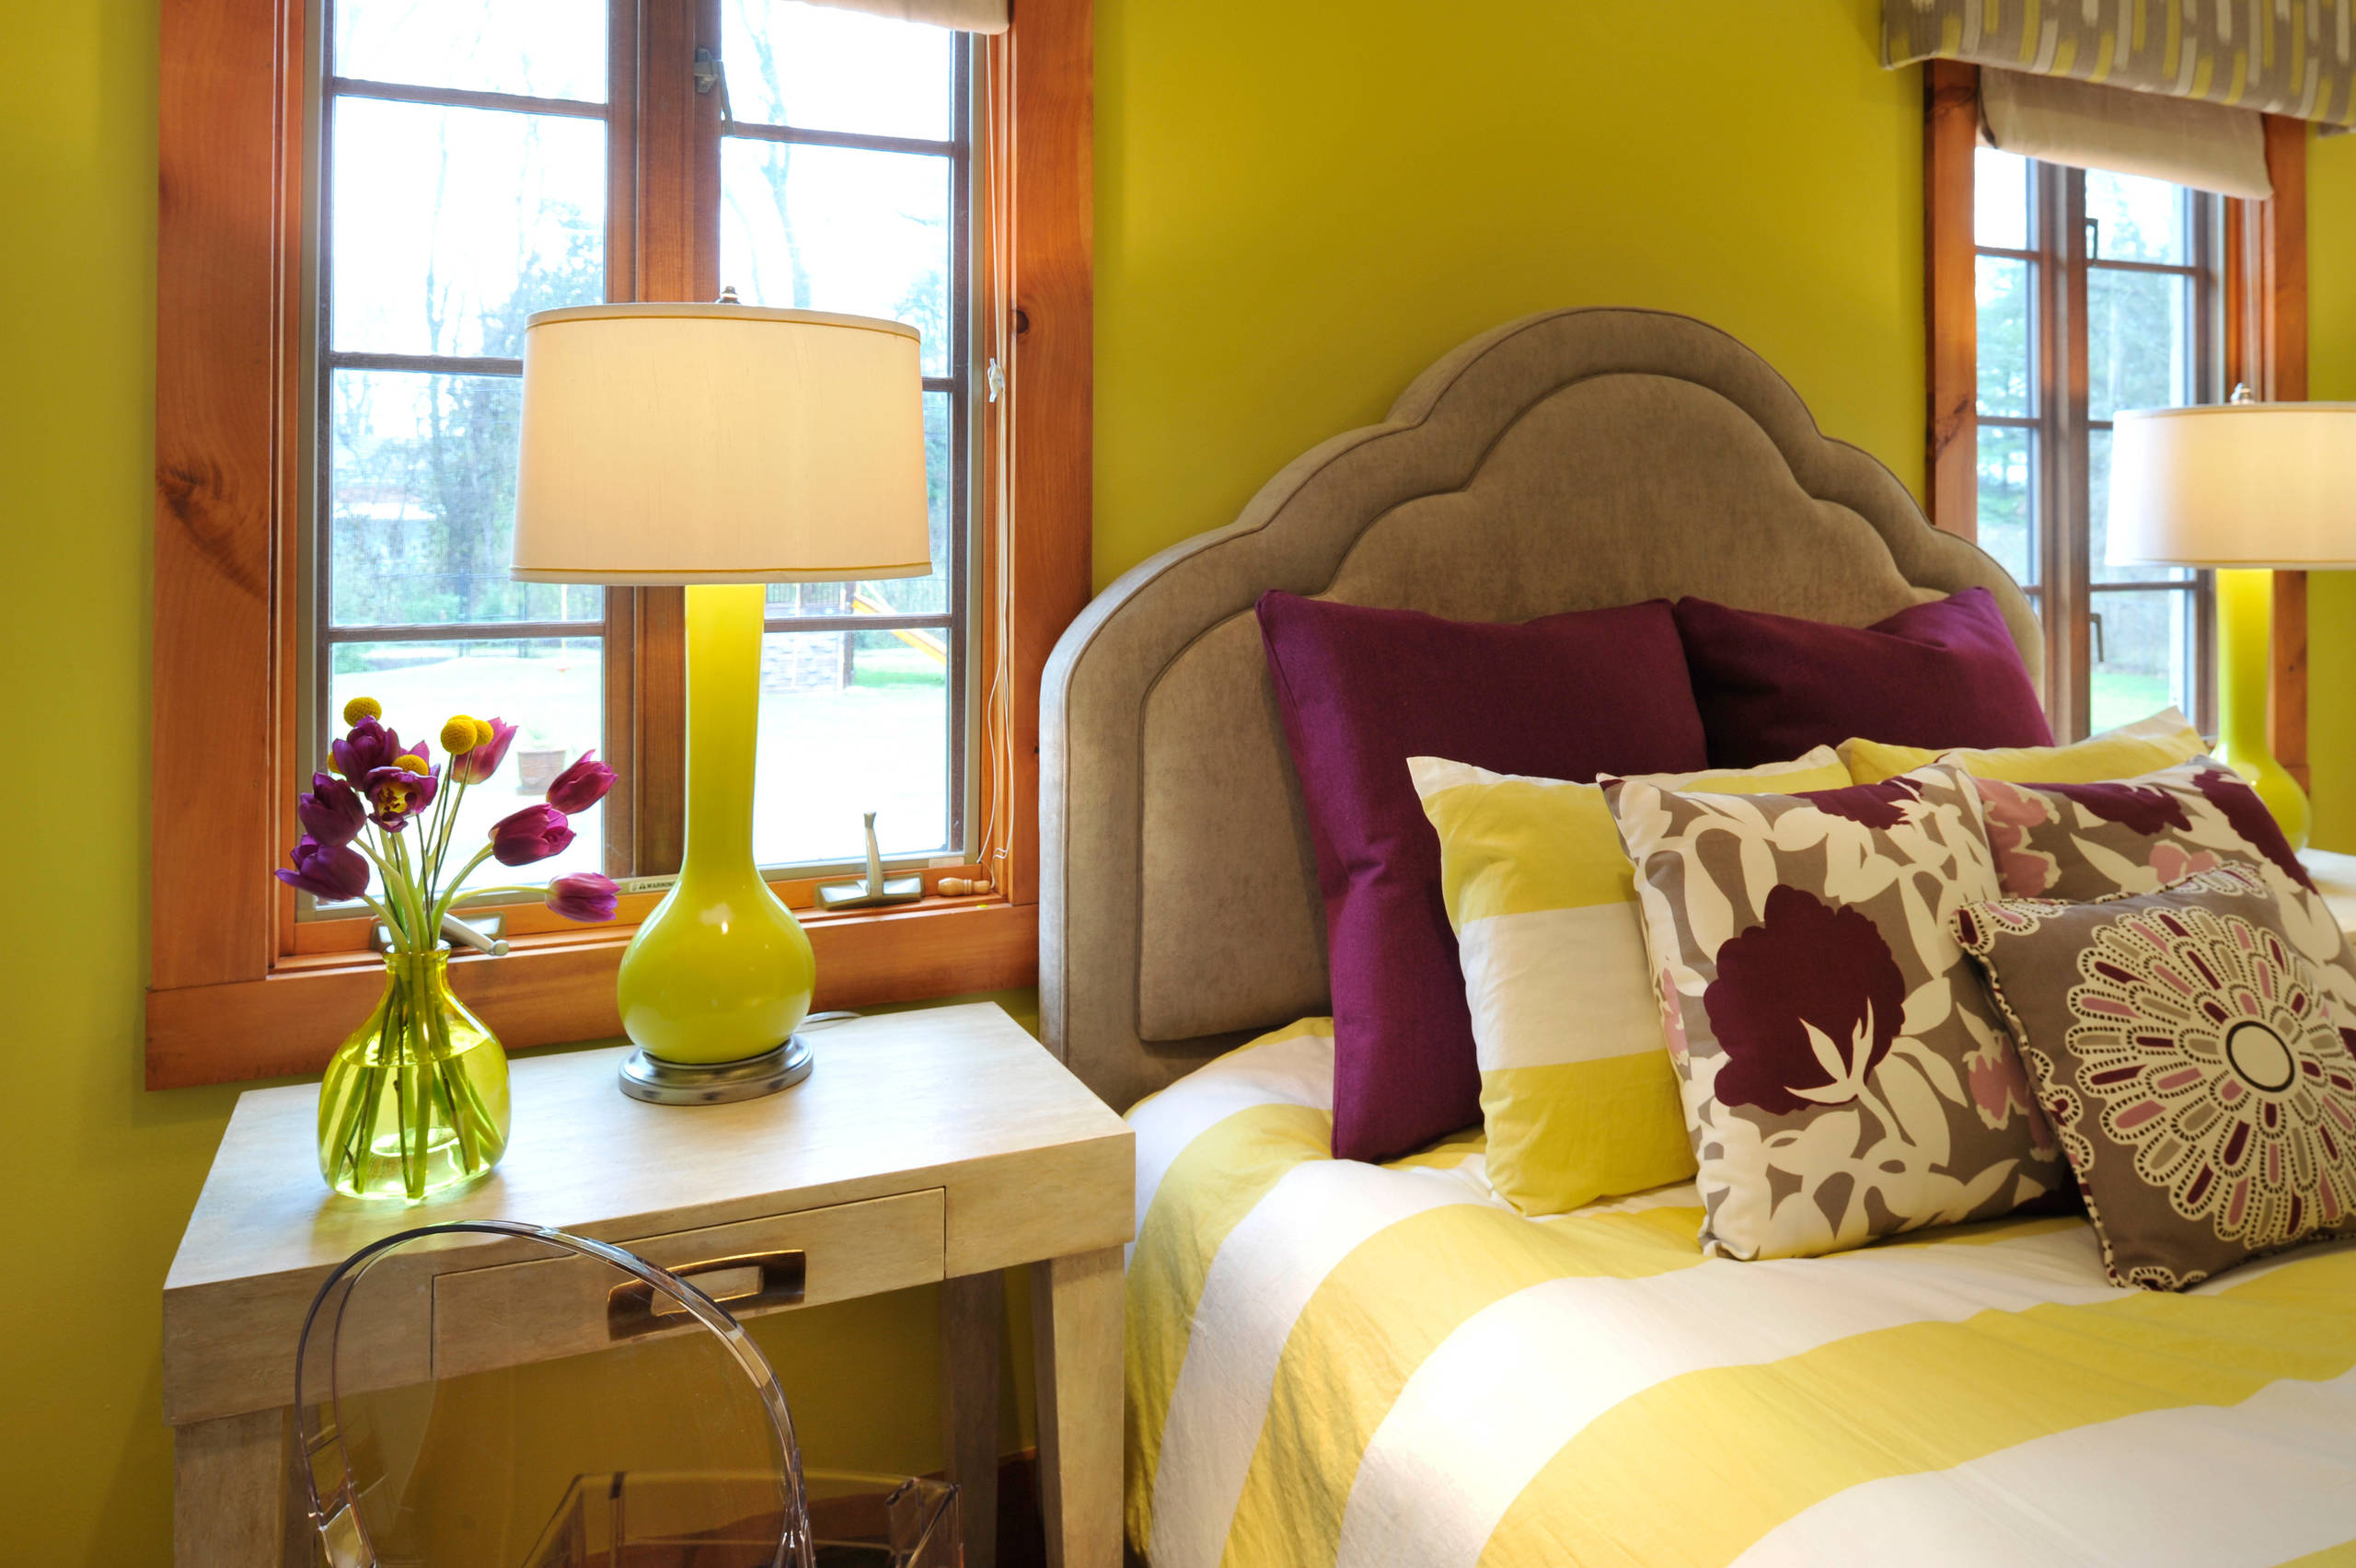 Decorating My Bedroom With Yellow And Purple